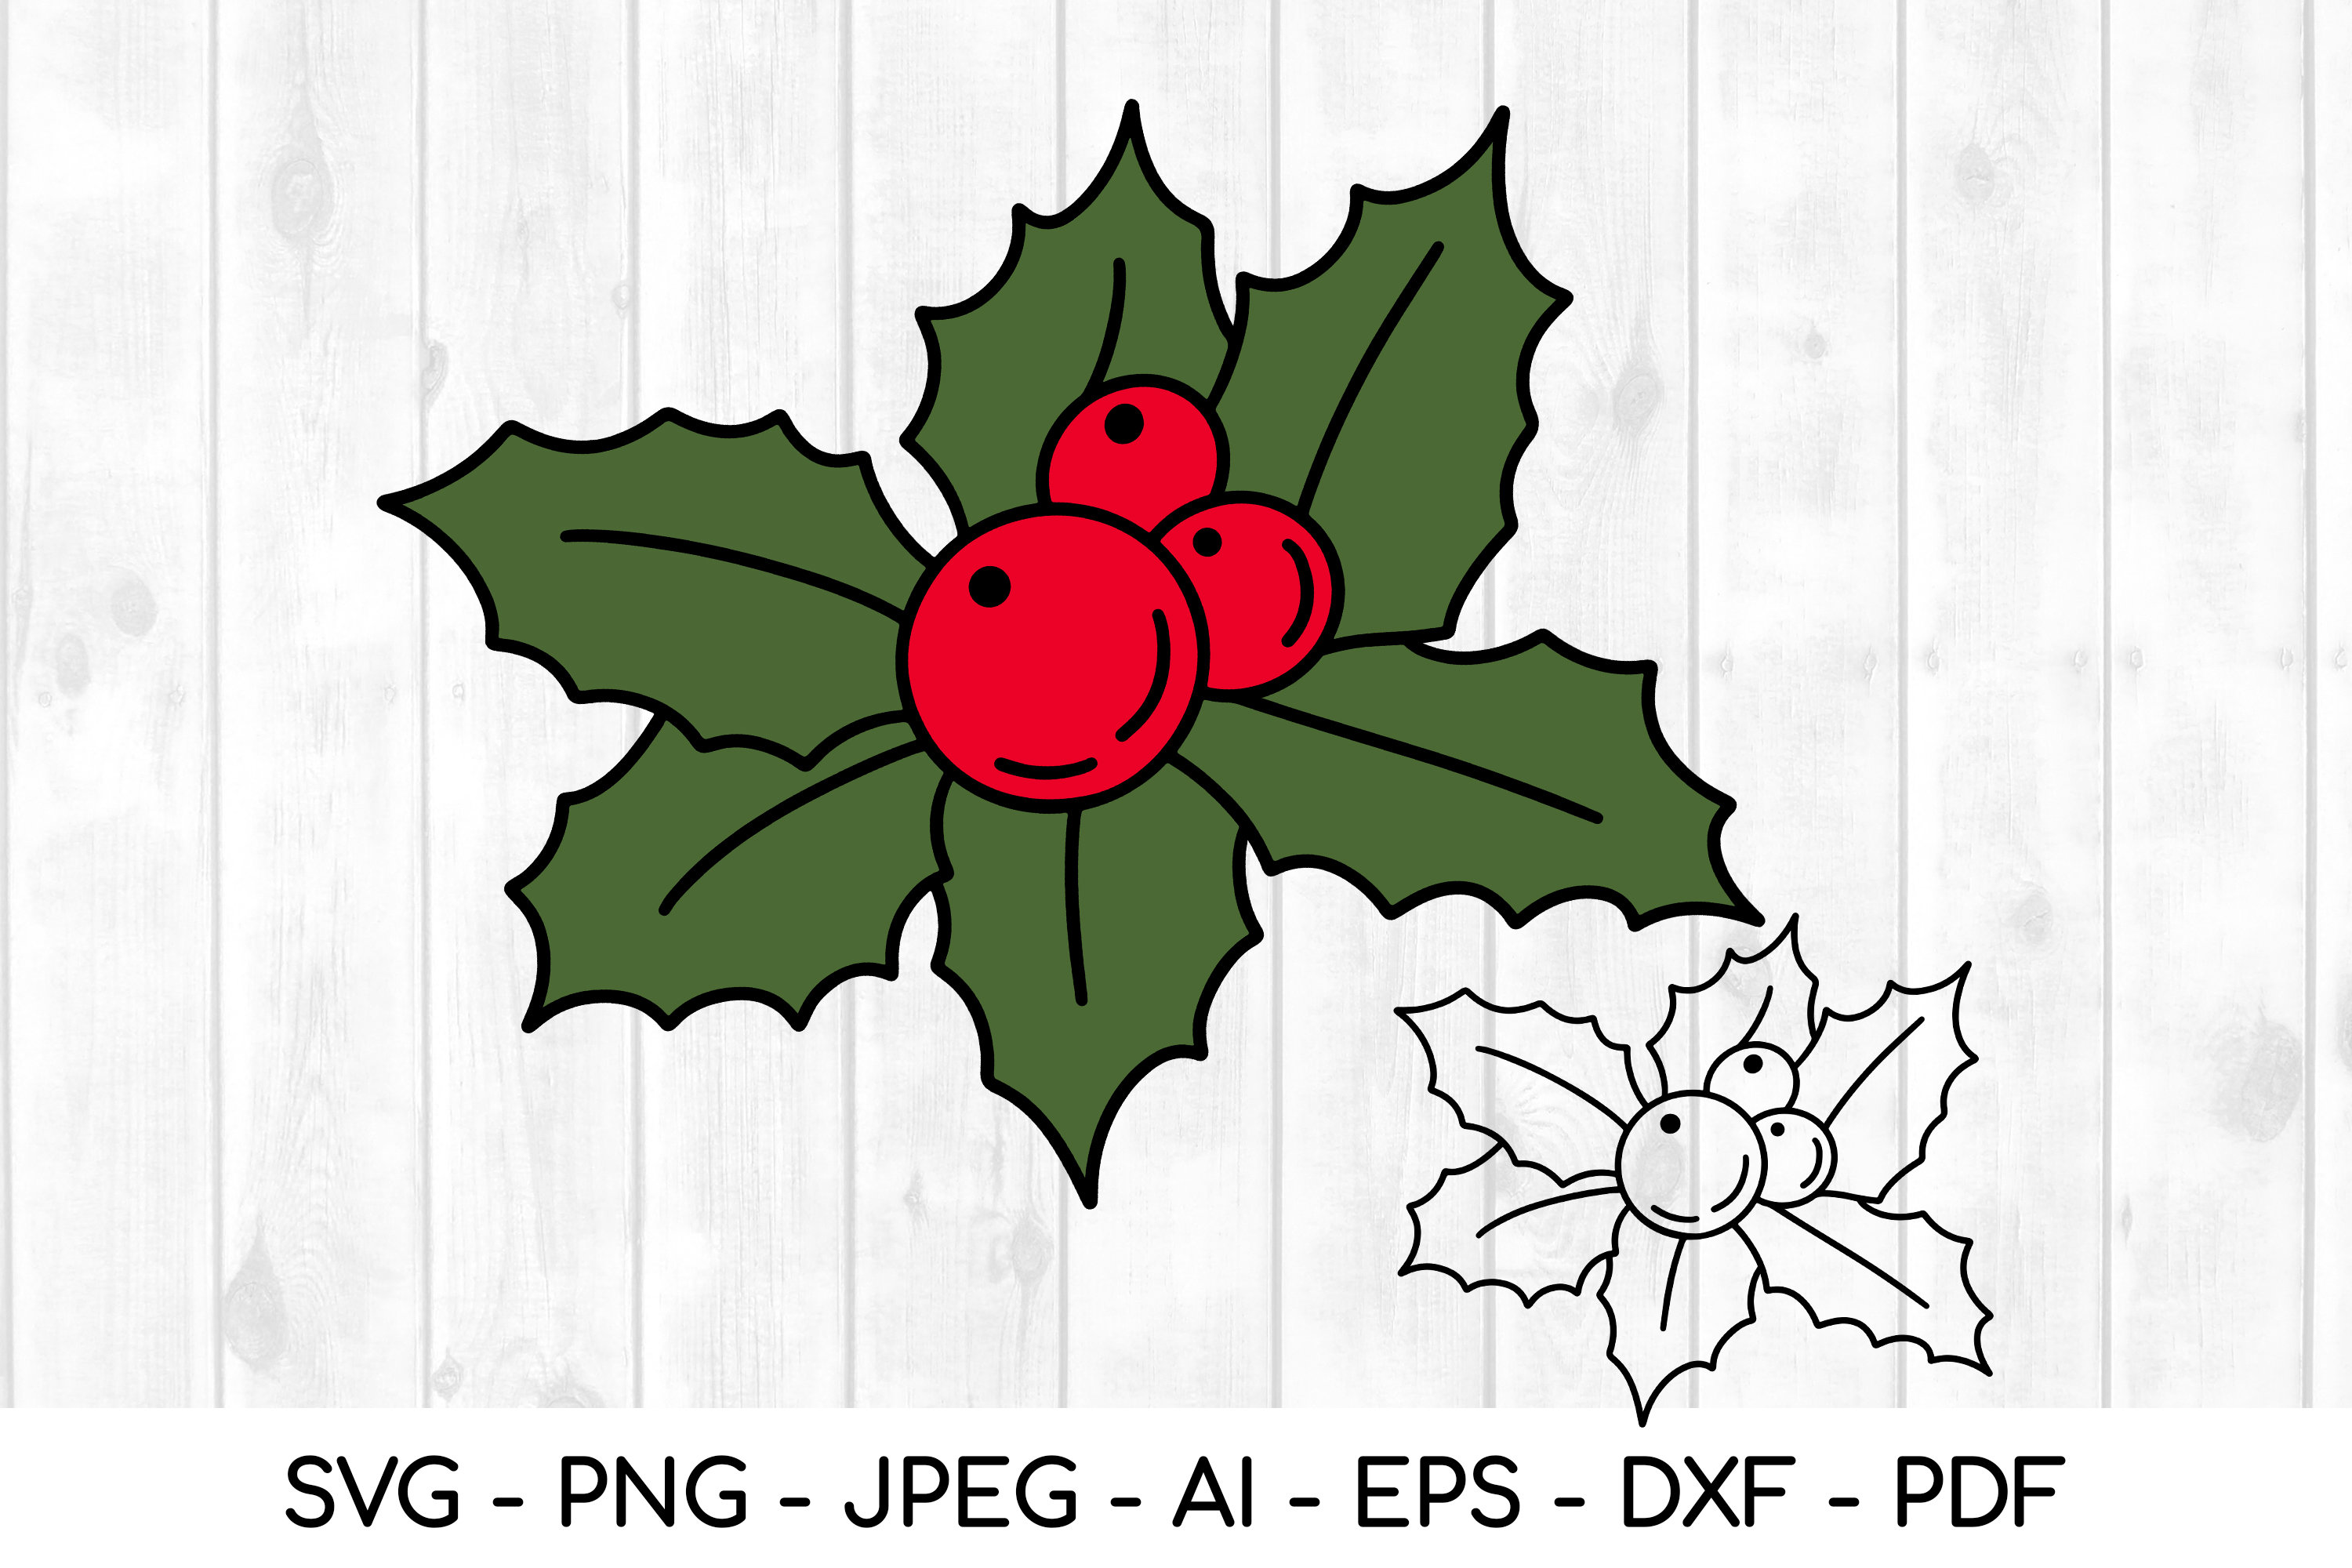 How to draw Christmas holly 